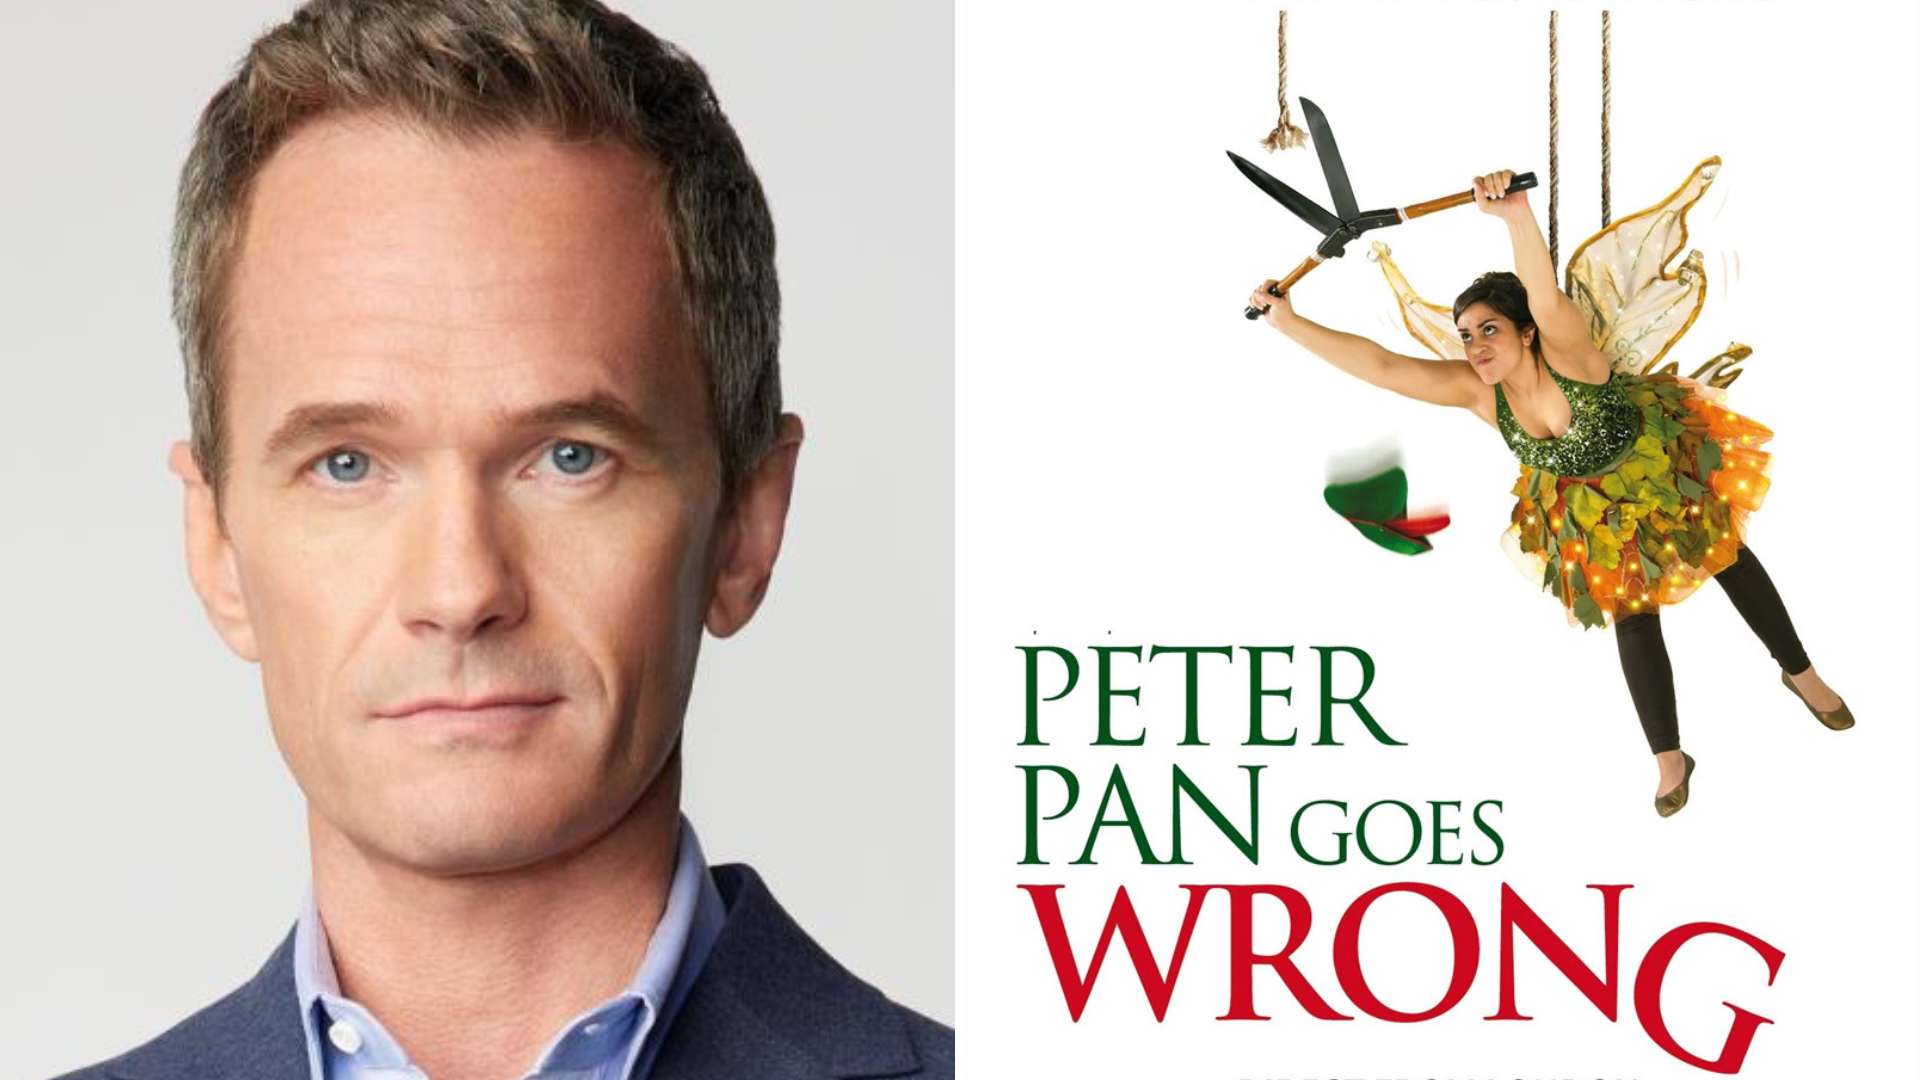 Peter Pan Goes Wrong Closes On Broadway July 23